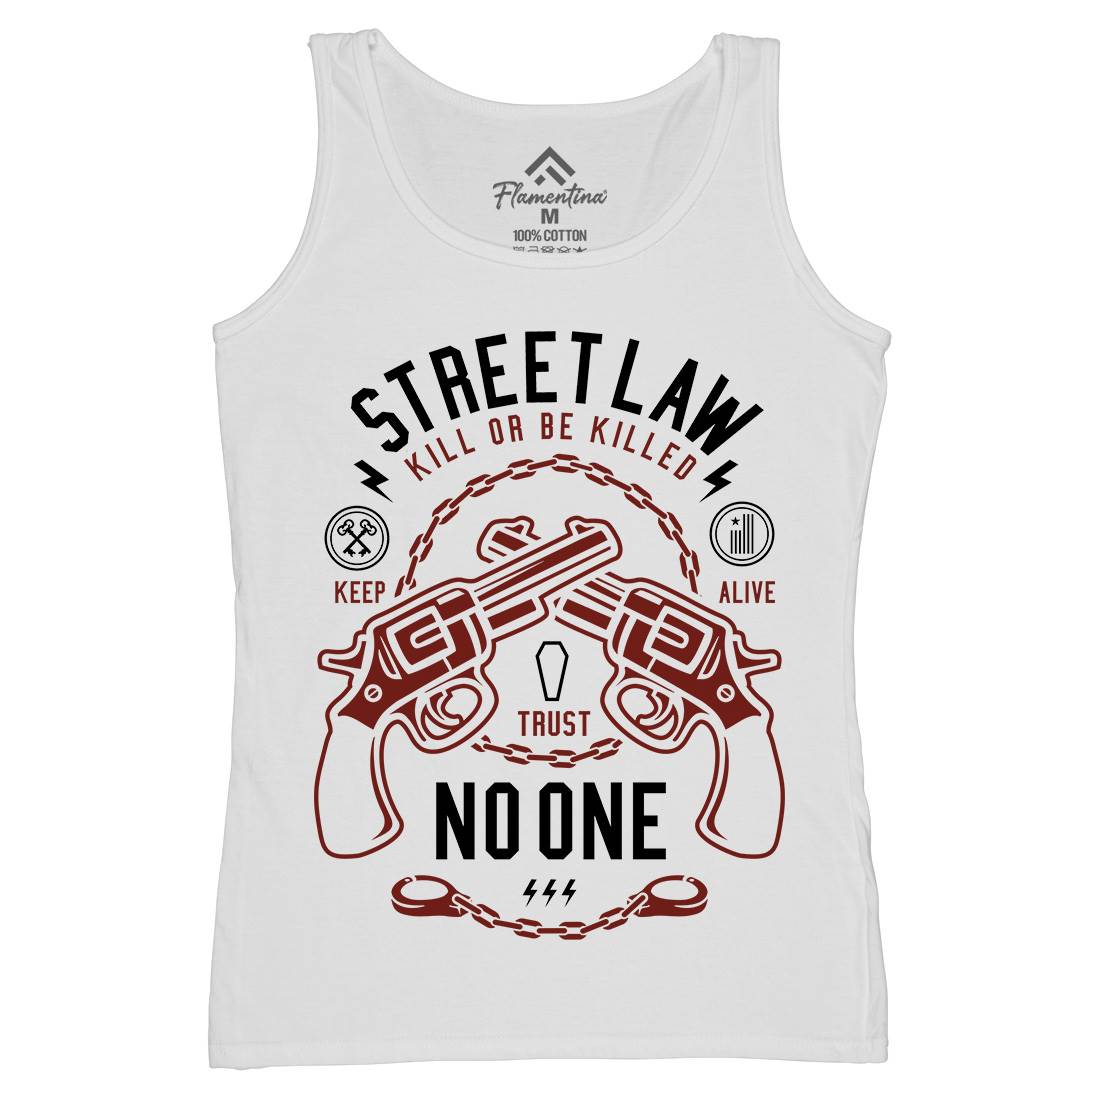 Street Law Womens Organic Tank Top Vest Quotes A286